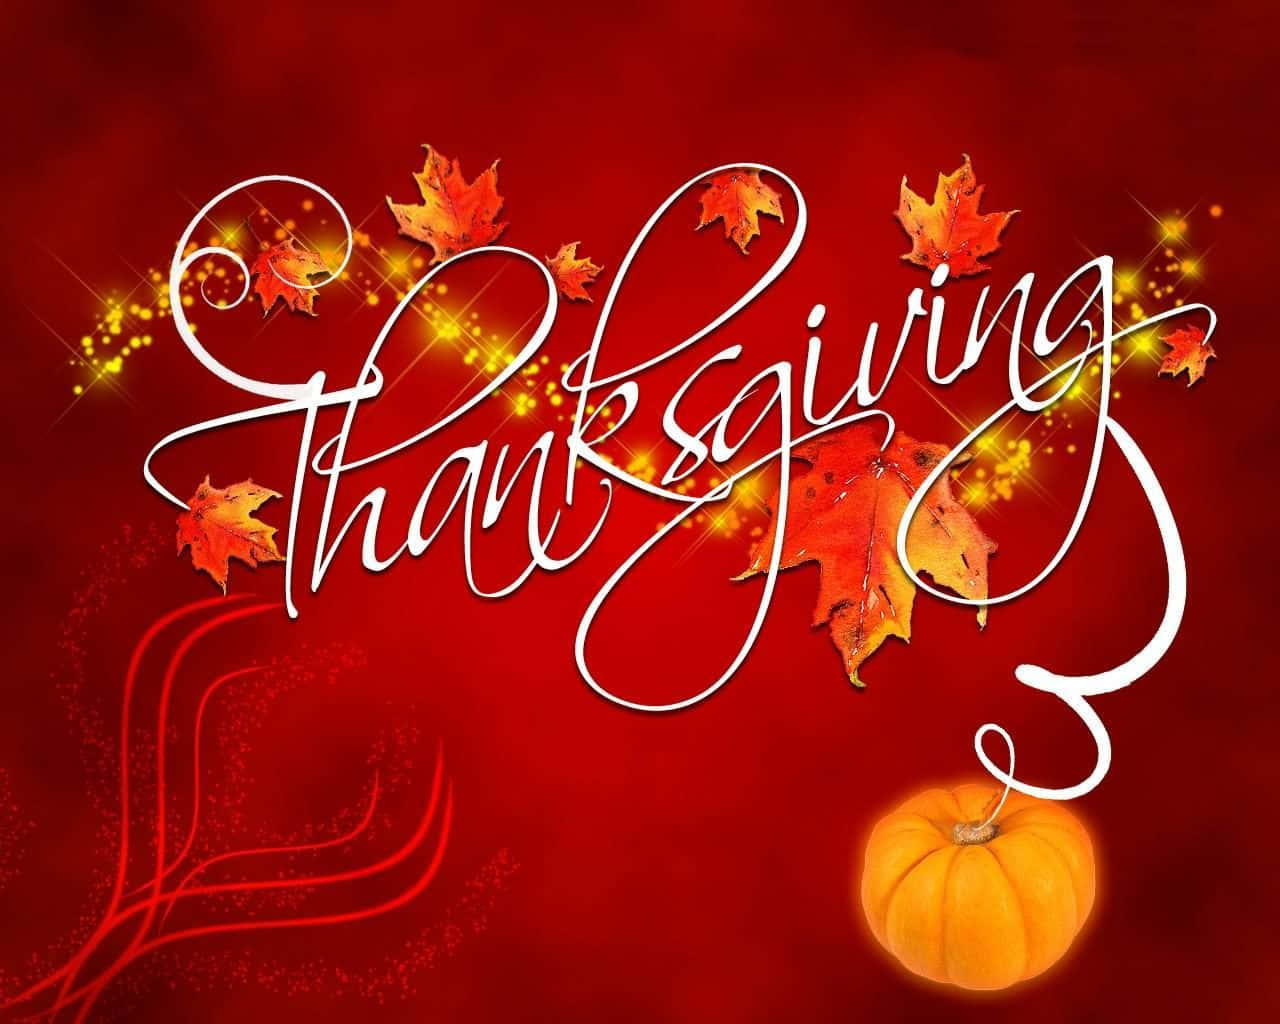 Celebrate the Harvest and Blessings of Thanksgiving